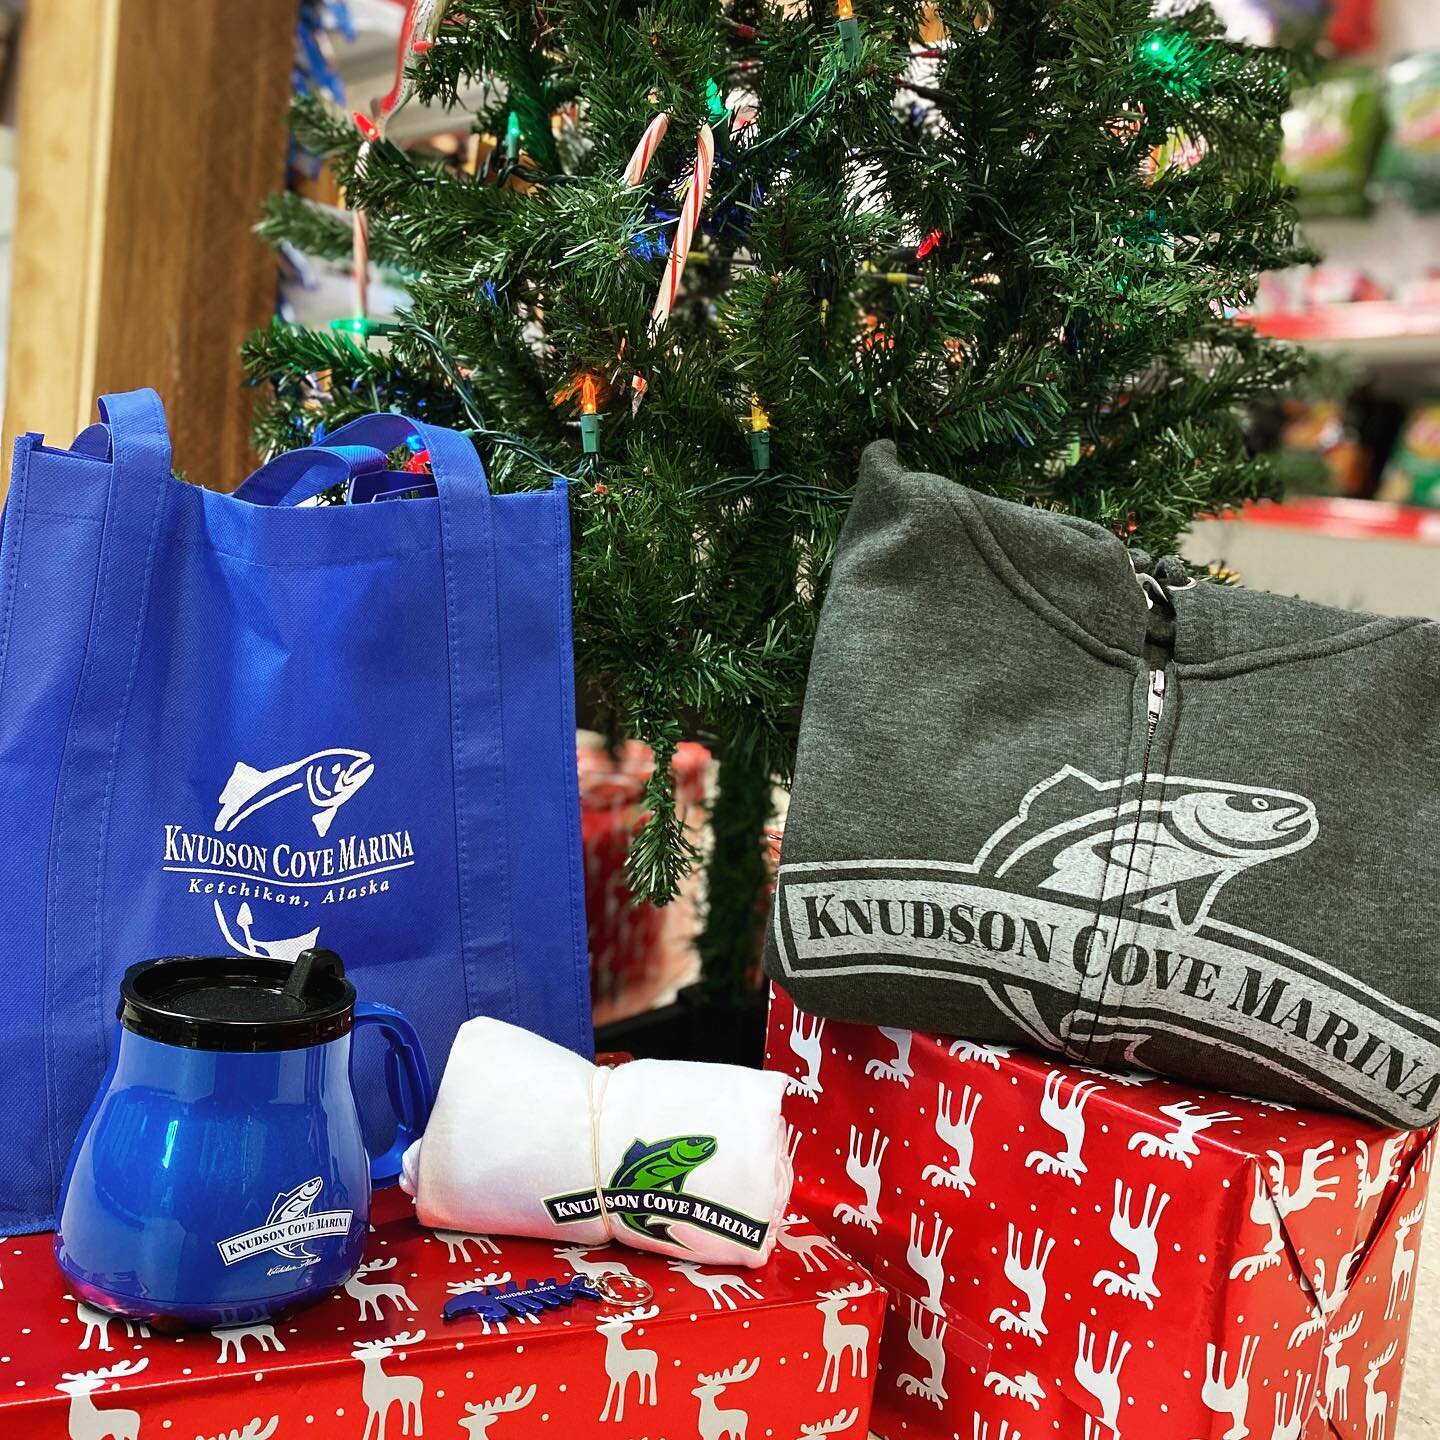 Grab a KCM gift bag for a loved one! Includes a hoodie, T shirt, Travel mug, keychain and KCM tote bag! You can grab them in person or online at knudsoncove.com for $70🎄✨Come in person to mix and match the hoodie and T shirt for any we have in stock